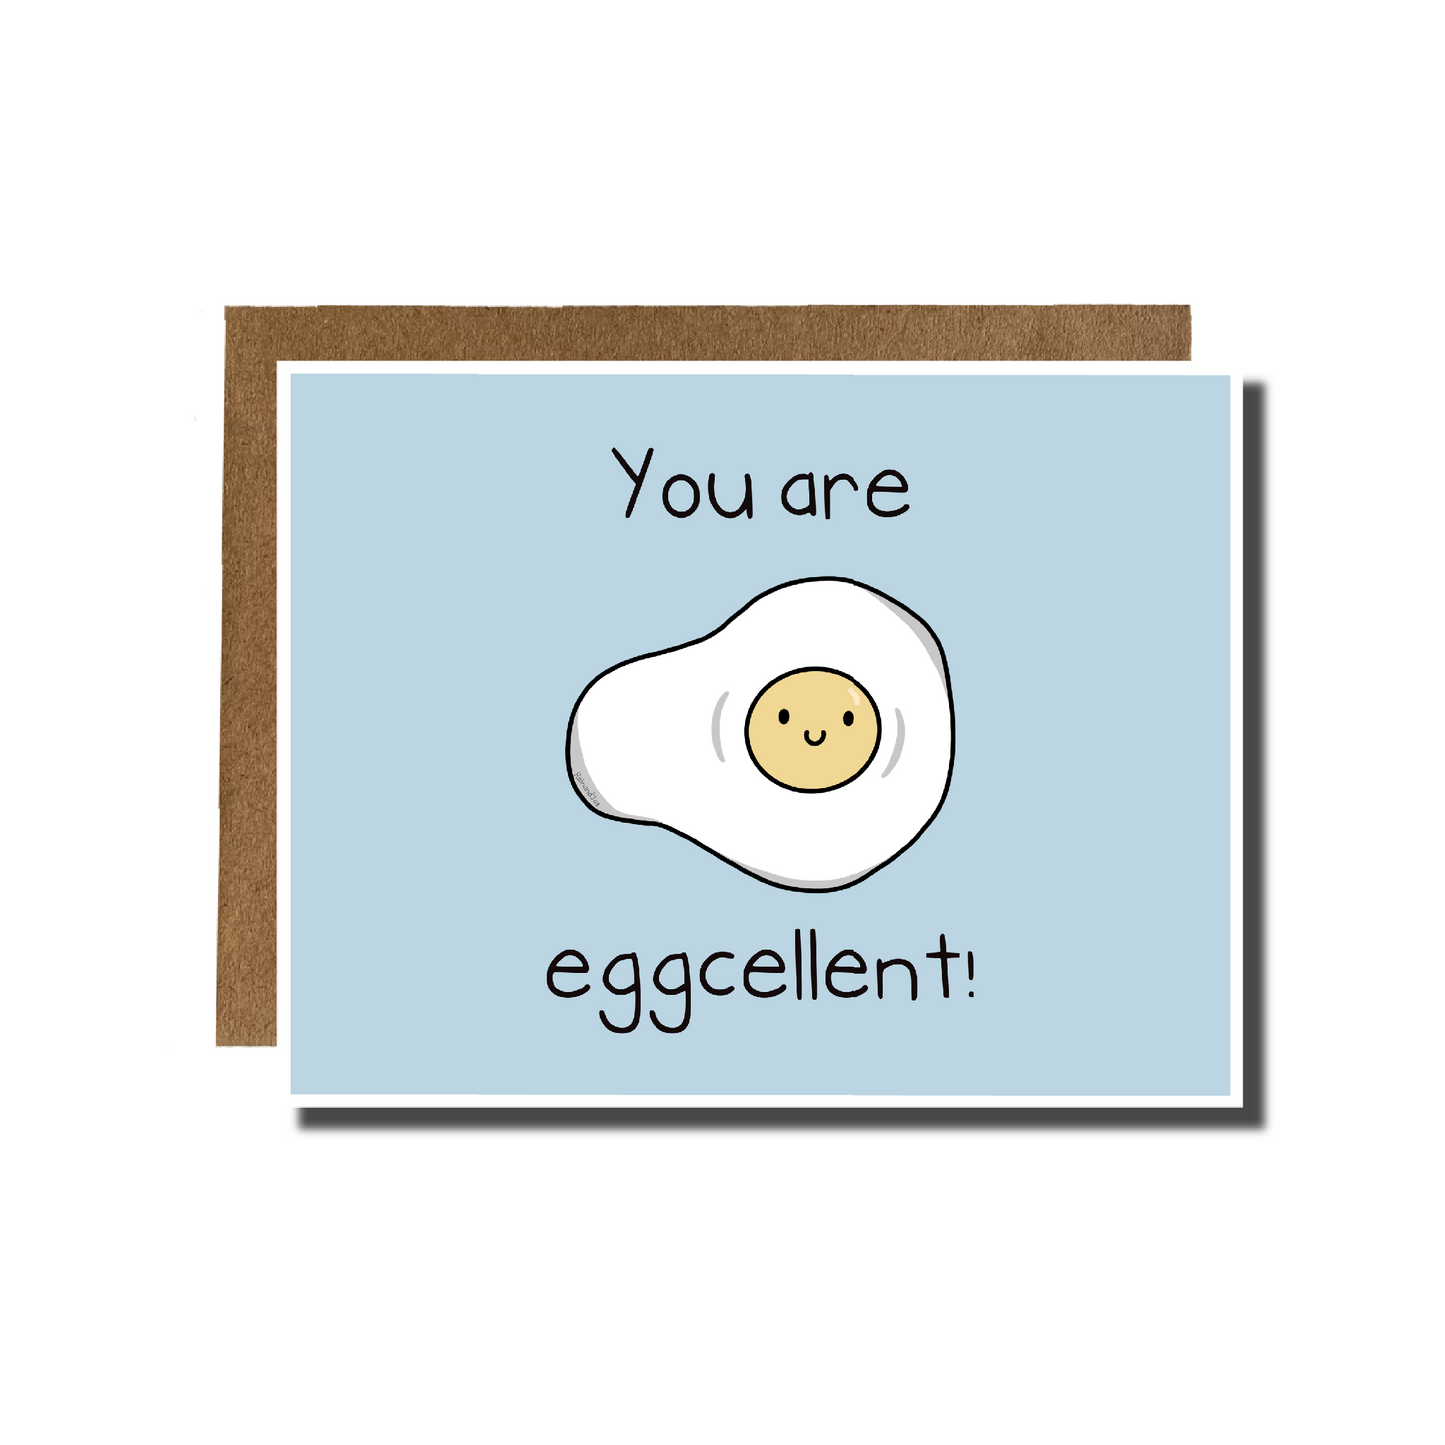 You are EGGcellent